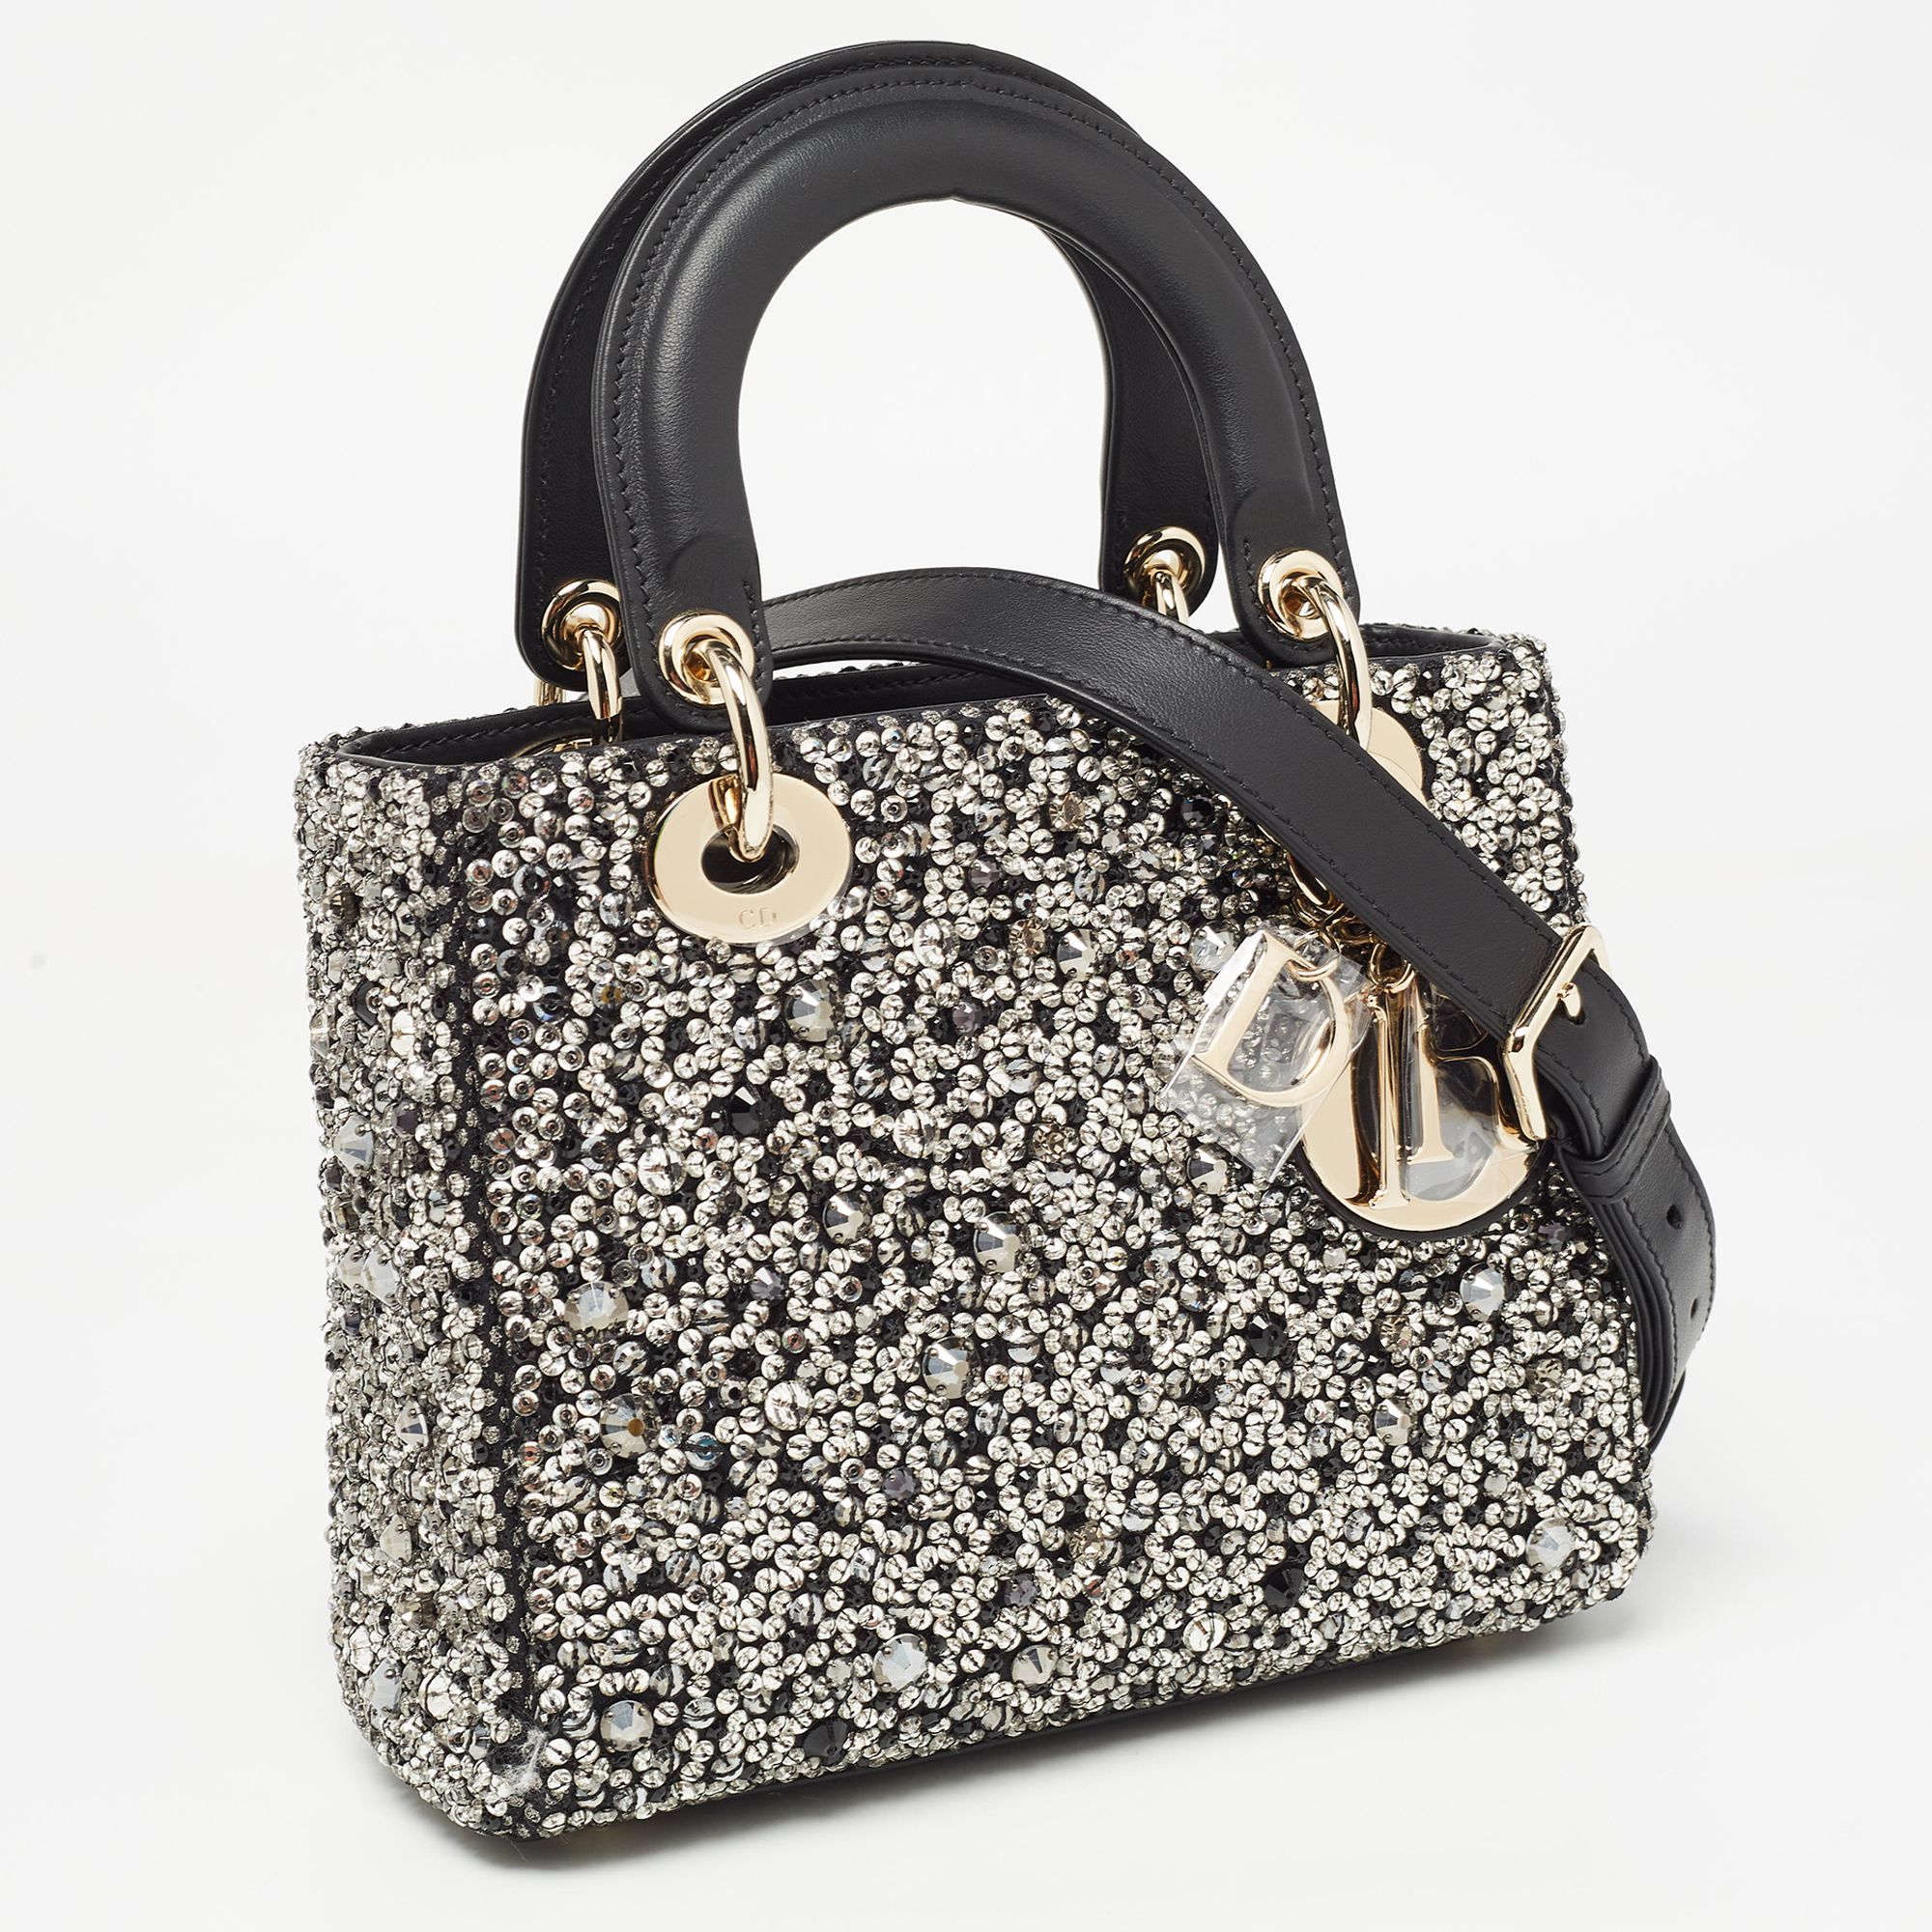 Dior Black Leather Sequins And Crystal Embellished Small Lady Dior Tote